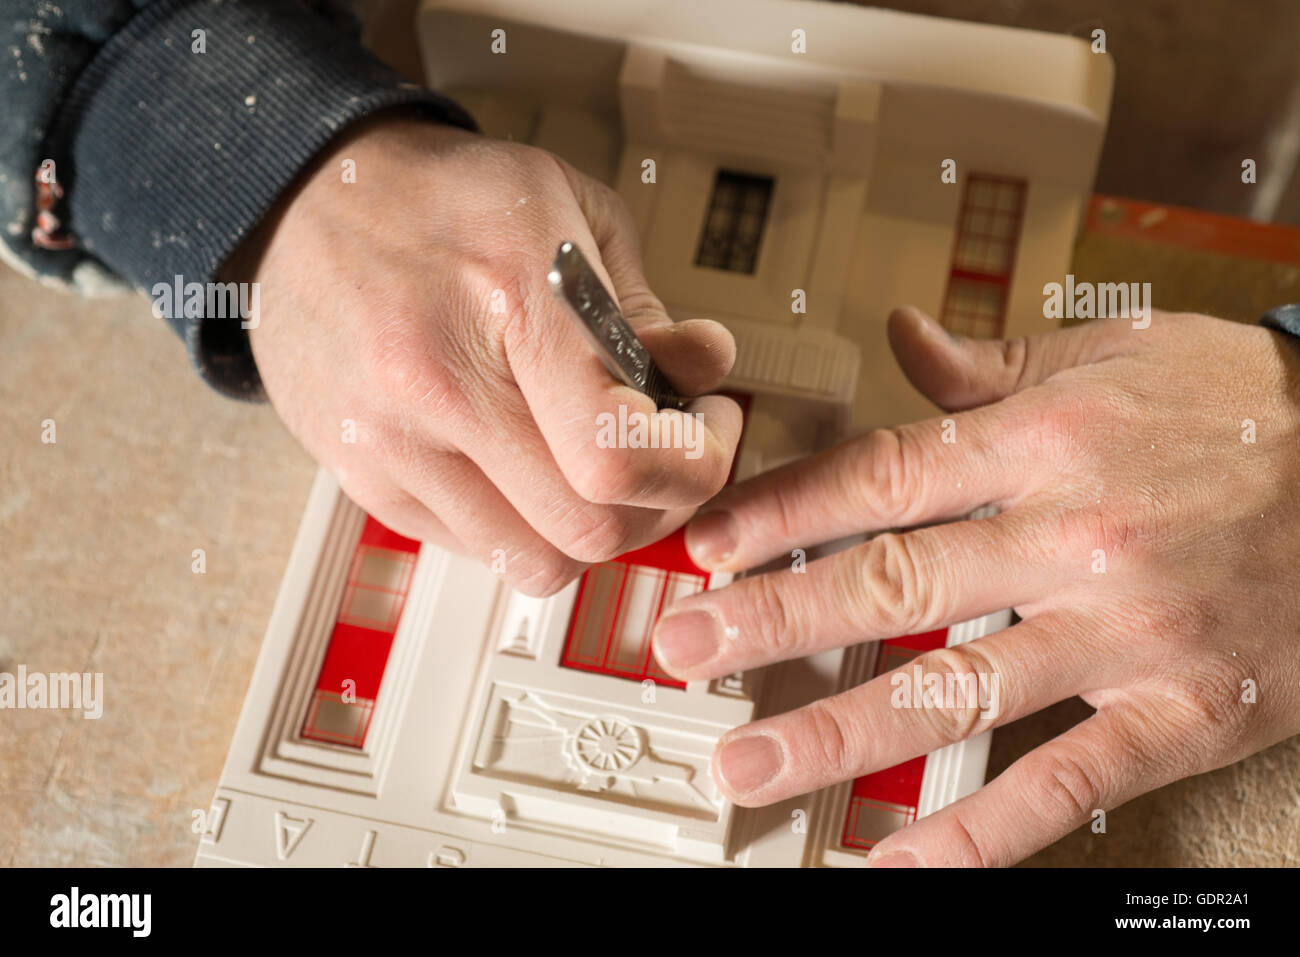 Hands, one holding a metal object, working on a plaster scale model architectural building Stock Photo